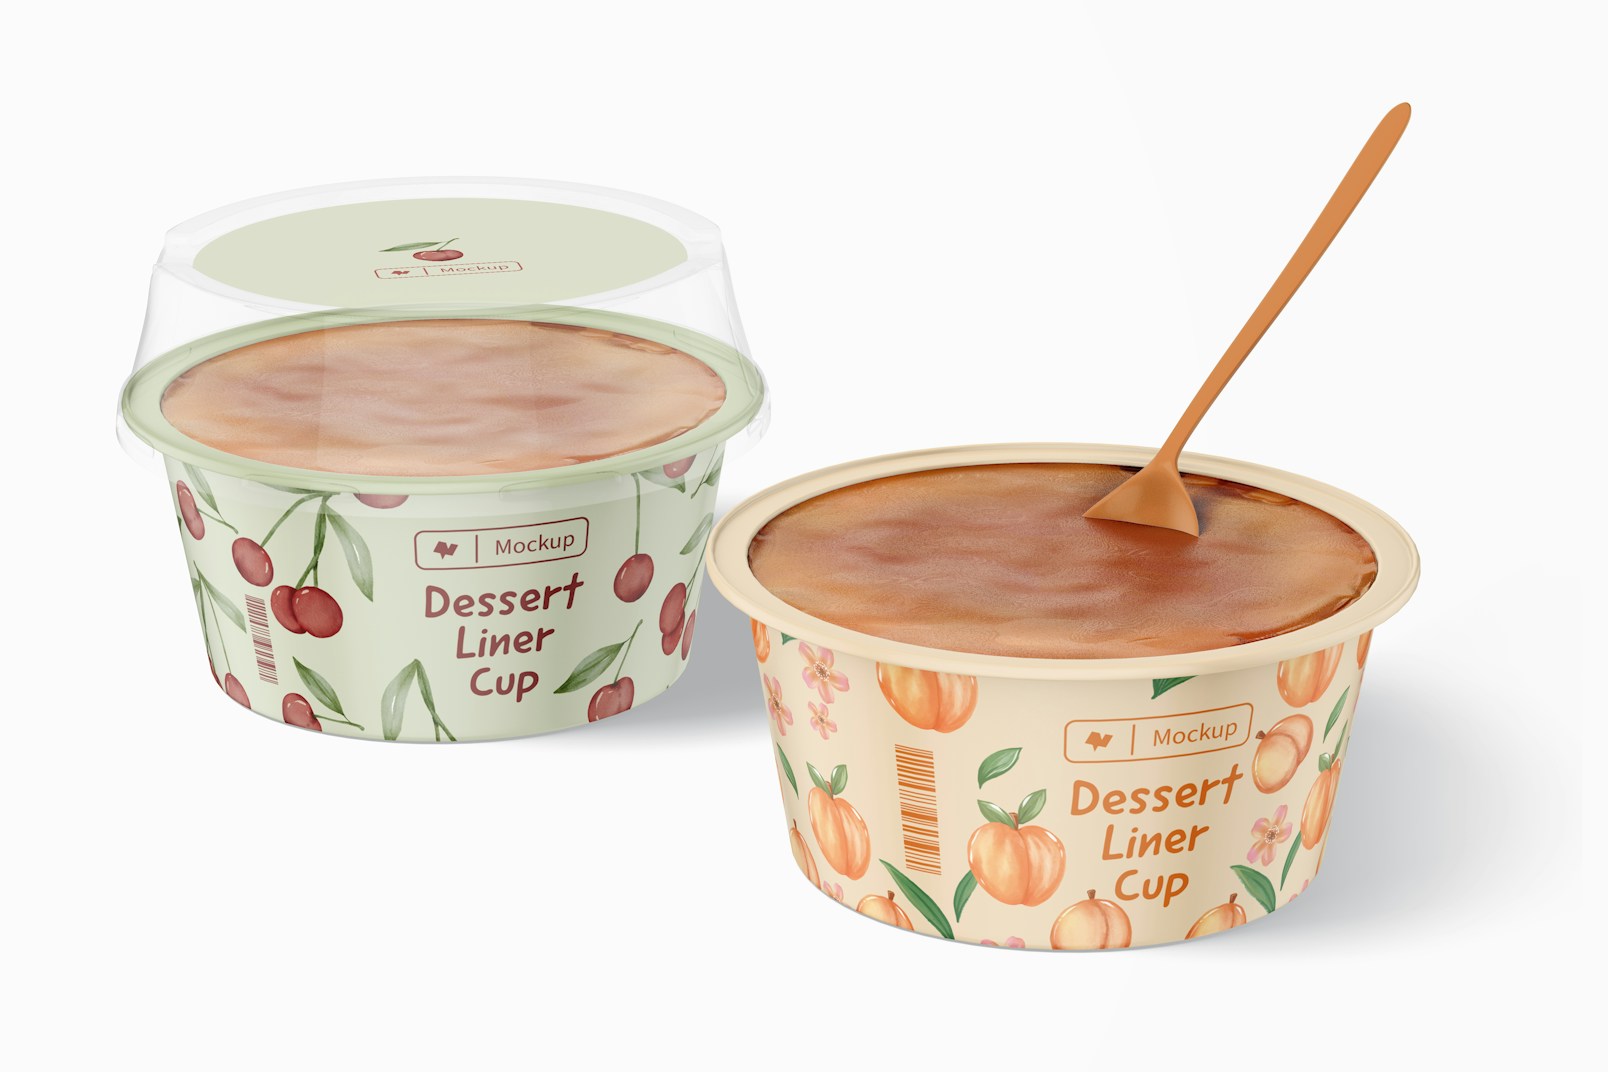 Dessert Liner Cup with Lid Mockup, Opened and Closed